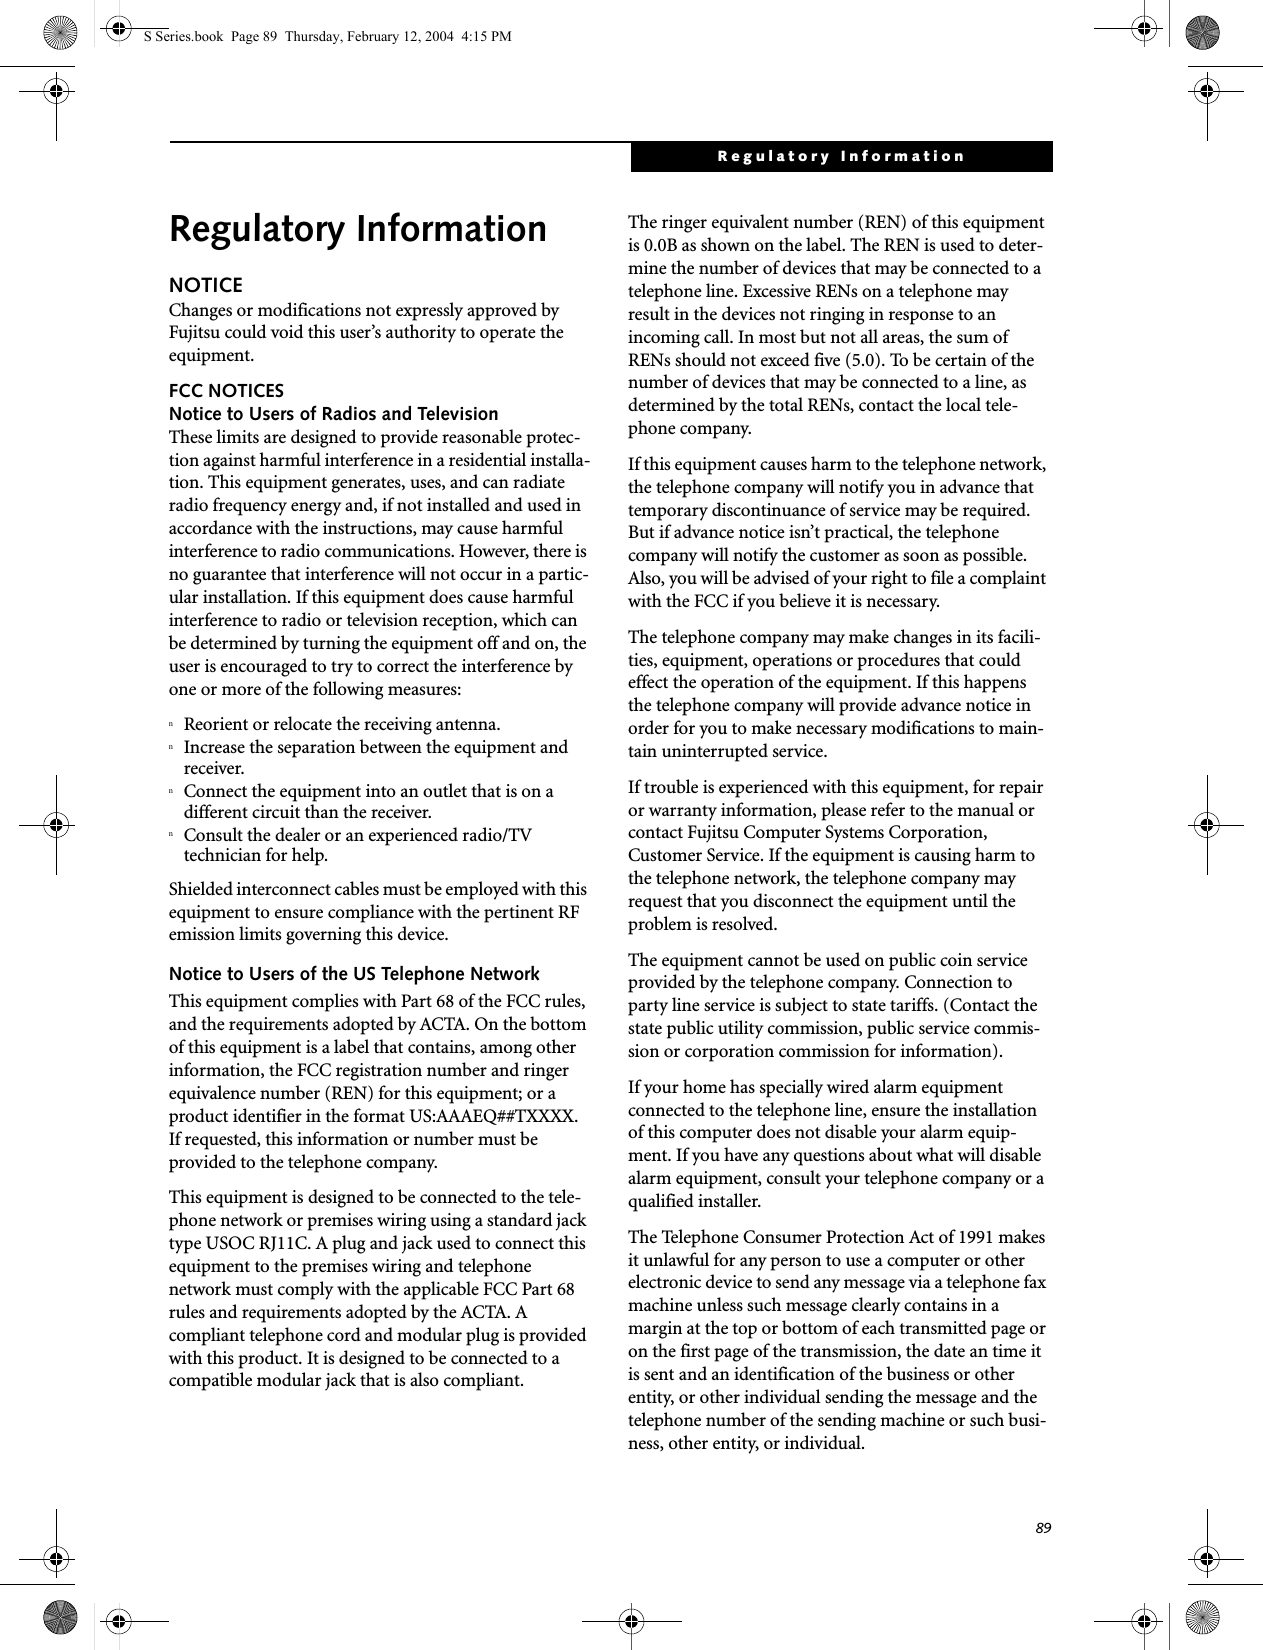 89Regulatory InformationRegulatory InformationNOTICEChanges or modifications not expressly approved by Fujitsu could void this user’s authority to operate the equipment.FCC NOTICESNotice to Users of Radios and TelevisionThese limits are designed to provide reasonable protec-tion against harmful interference in a residential installa-tion. This equipment generates, uses, and can radiate radio frequency energy and, if not installed and used in accordance with the instructions, may cause harmful interference to radio communications. However, there is no guarantee that interference will not occur in a partic-ular installation. If this equipment does cause harmful interference to radio or television reception, which can be determined by turning the equipment off and on, the user is encouraged to try to correct the interference by one or more of the following measures:nReorient or relocate the receiving antenna.nIncrease the separation between the equipment and receiver.nConnect the equipment into an outlet that is on a different circuit than the receiver.nConsult the dealer or an experienced radio/TVtechnician for help.Shielded interconnect cables must be employed with this equipment to ensure compliance with the pertinent RF emission limits governing this device. Notice to Users of the US Telephone NetworkThis equipment complies with Part 68 of the FCC rules, and the requirements adopted by ACTA. On the bottom of this equipment is a label that contains, among other information, the FCC registration number and ringer equivalence number (REN) for this equipment; or a product identifier in the format US:AAAEQ##TXXXX. If requested, this information or number must be provided to the telephone company.This equipment is designed to be connected to the tele-phone network or premises wiring using a standard jack type USOC RJ11C. A plug and jack used to connect this equipment to the premises wiring and telephone network must comply with the applicable FCC Part 68 rules and requirements adopted by the ACTA. A compliant telephone cord and modular plug is provided with this product. It is designed to be connected to a compatible modular jack that is also compliant.The ringer equivalent number (REN) of this equipment is 0.0B as shown on the label. The REN is used to deter-mine the number of devices that may be connected to a telephone line. Excessive RENs on a telephone may result in the devices not ringing in response to an incoming call. In most but not all areas, the sum of RENs should not exceed five (5.0). To be certain of the number of devices that may be connected to a line, as determined by the total RENs, contact the local tele-phone company. If this equipment causes harm to the telephone network, the telephone company will notify you in advance that temporary discontinuance of service may be required. But if advance notice isn’t practical, the telephone company will notify the customer as soon as possible. Also, you will be advised of your right to file a complaint with the FCC if you believe it is necessary.The telephone company may make changes in its facili-ties, equipment, operations or procedures that could effect the operation of the equipment. If this happens the telephone company will provide advance notice in order for you to make necessary modifications to main-tain uninterrupted service. If trouble is experienced with this equipment, for repair or warranty information, please refer to the manual or contact Fujitsu Computer Systems Corporation, Customer Service. If the equipment is causing harm to the telephone network, the telephone company may request that you disconnect the equipment until the problem is resolved.The equipment cannot be used on public coin service provided by the telephone company. Connection to party line service is subject to state tariffs. (Contact the state public utility commission, public service commis-sion or corporation commission for information). If your home has specially wired alarm equipment connected to the telephone line, ensure the installation of this computer does not disable your alarm equip-ment. If you have any questions about what will disable alarm equipment, consult your telephone company or a qualified installer.The Telephone Consumer Protection Act of 1991 makes it unlawful for any person to use a computer or other electronic device to send any message via a telephone fax machine unless such message clearly contains in a margin at the top or bottom of each transmitted page or on the first page of the transmission, the date an time it is sent and an identification of the business or other entity, or other individual sending the message and the telephone number of the sending machine or such busi-ness, other entity, or individual.S Series.book  Page 89  Thursday, February 12, 2004  4:15 PM